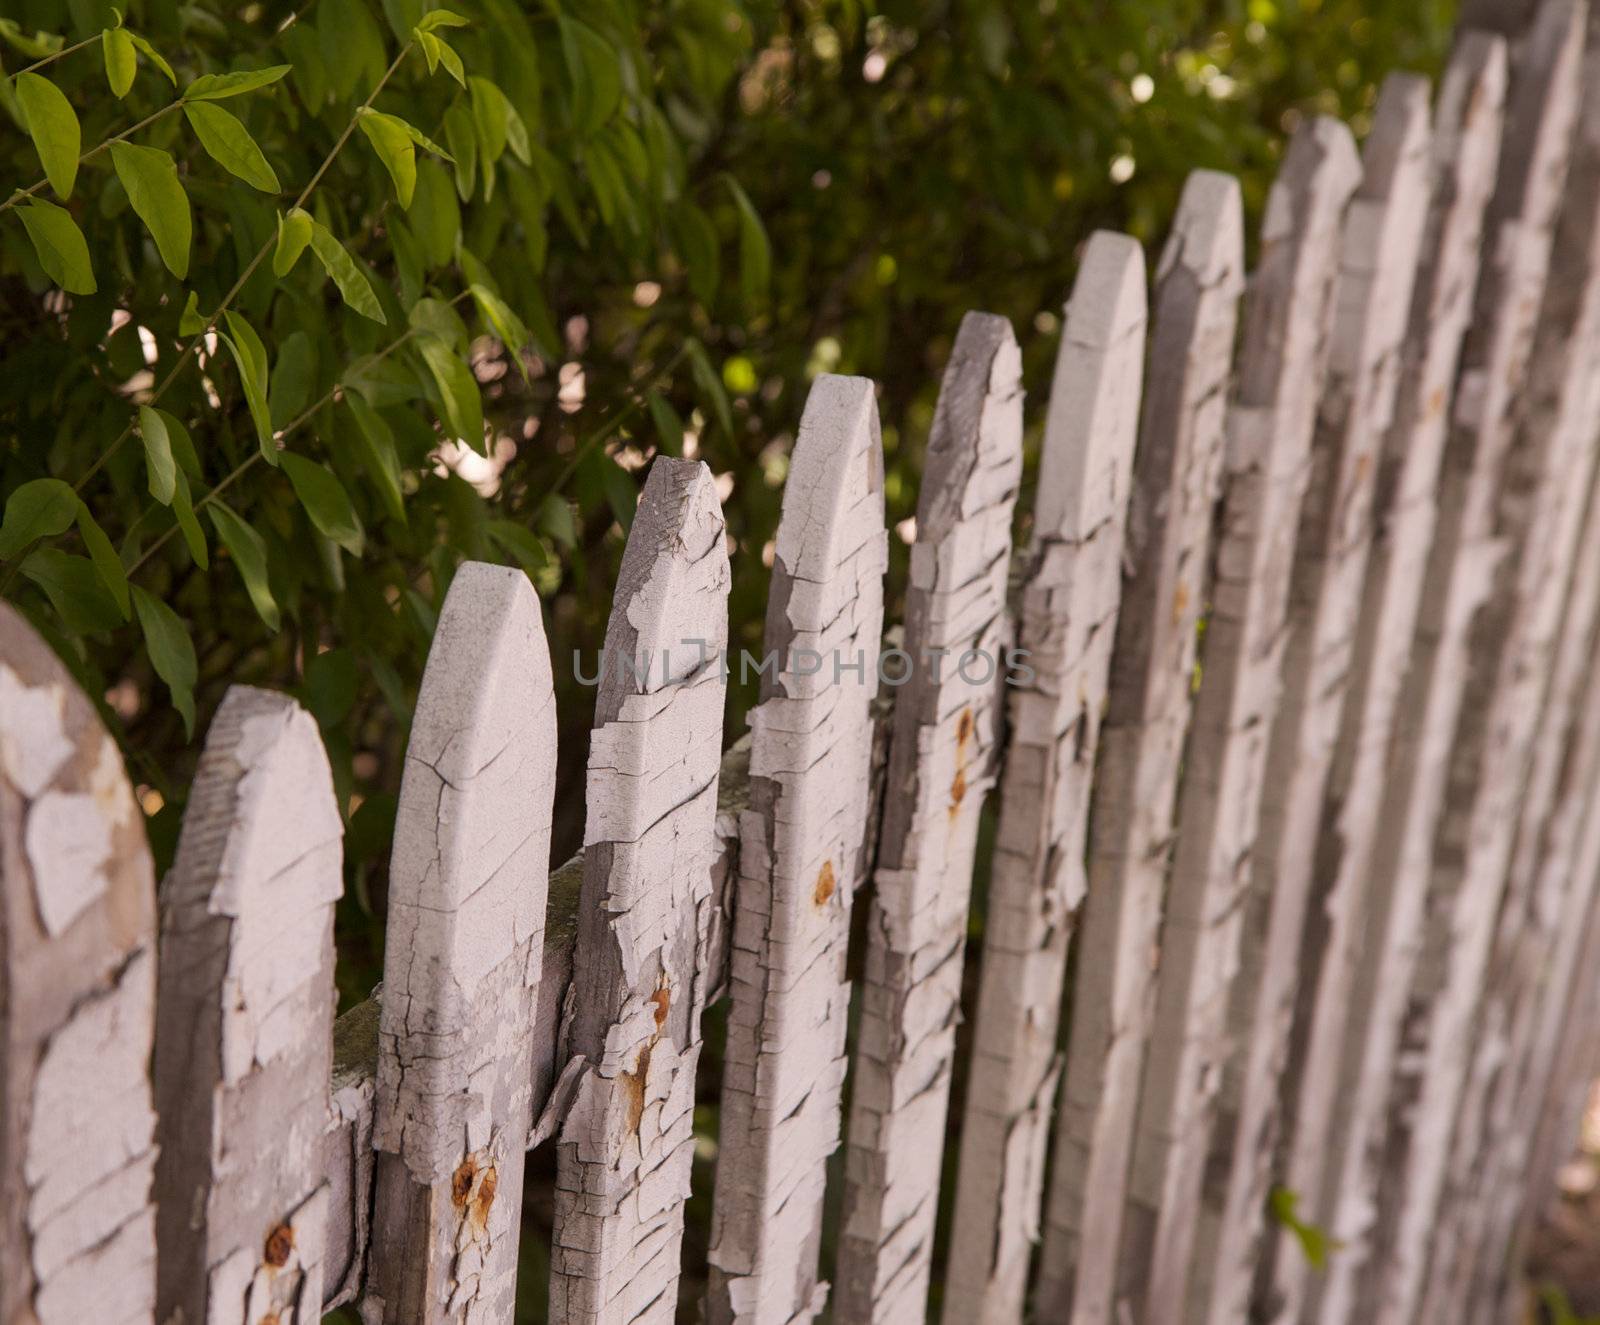 Old residential wood white picket fence placed diagonally across the image